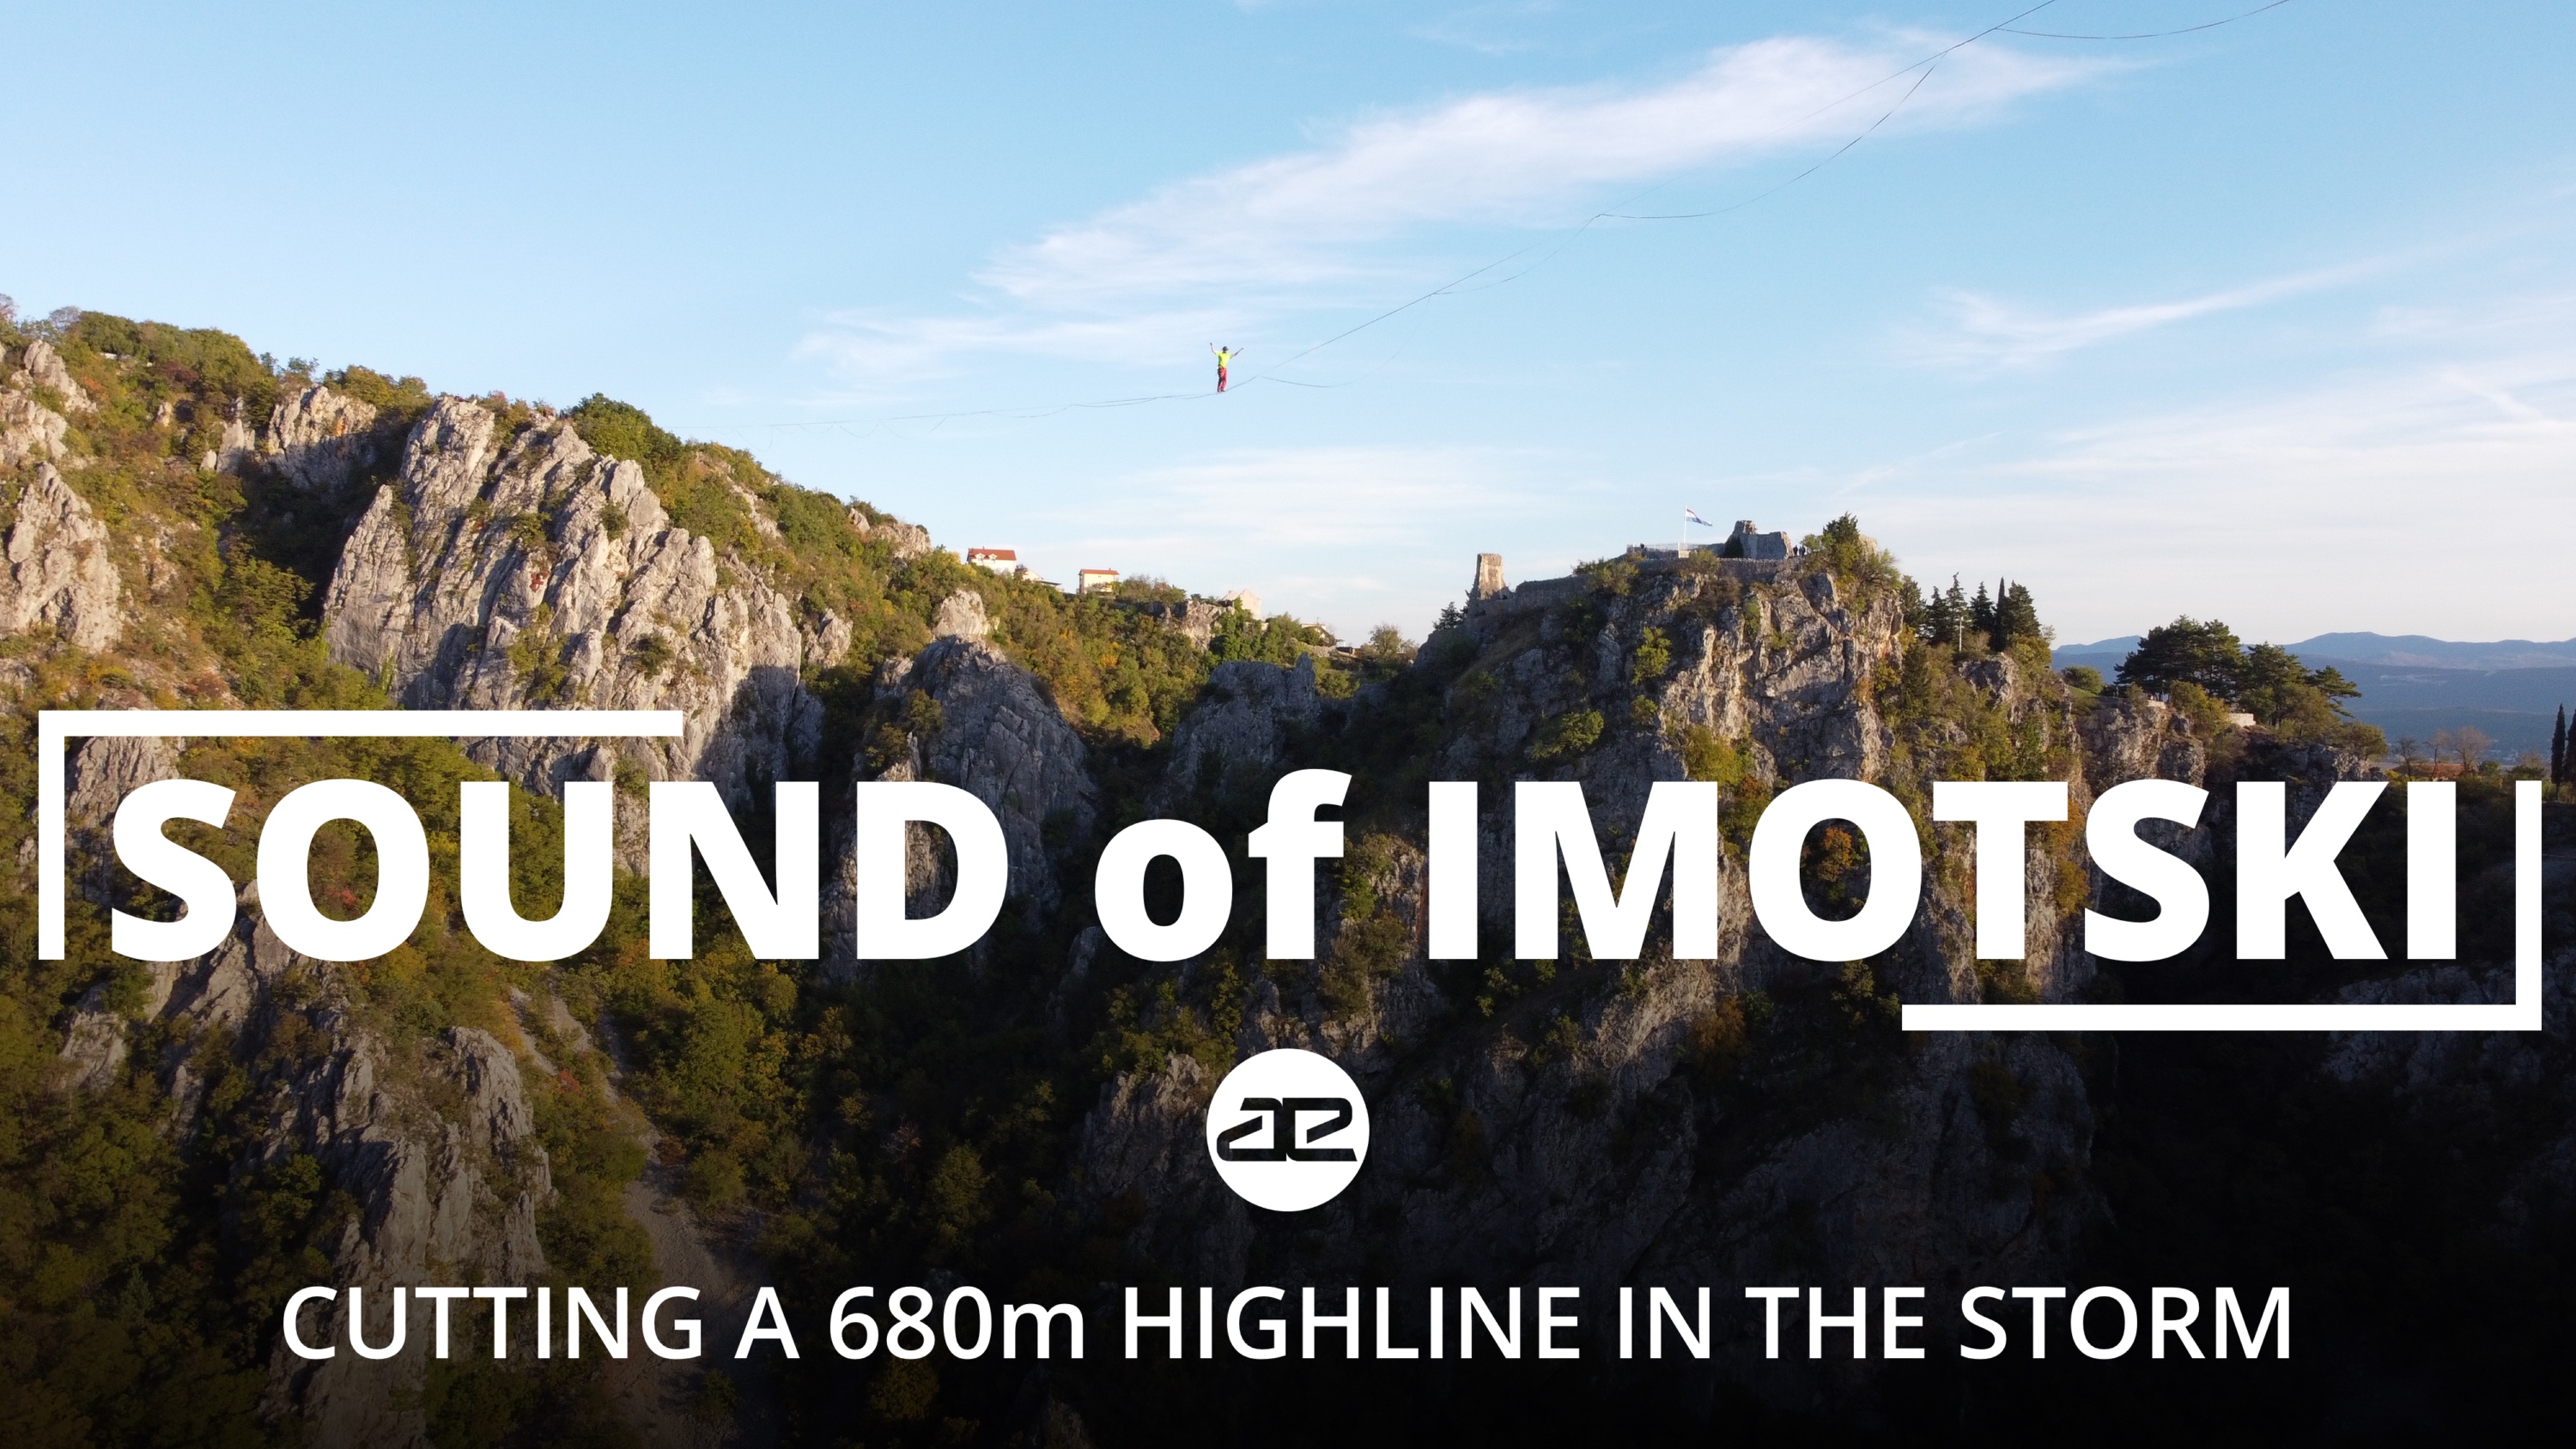 SOUND of IMOTSKI - CUTTING A 680m HIGHLINE IN THE STORM